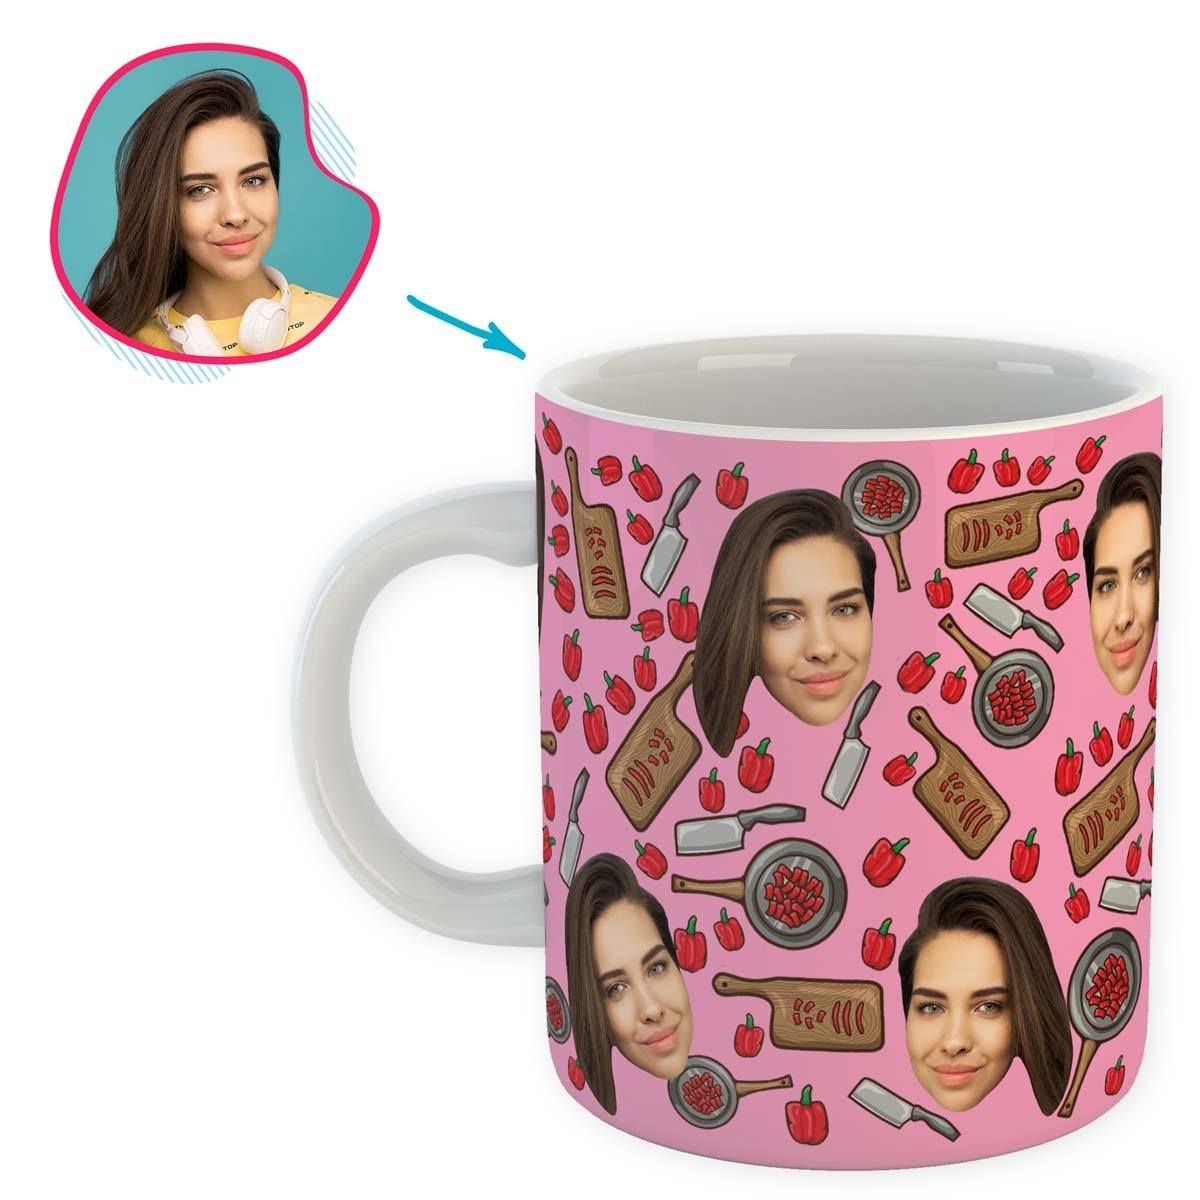 pink Сooking mug personalized with photo of face printed on it